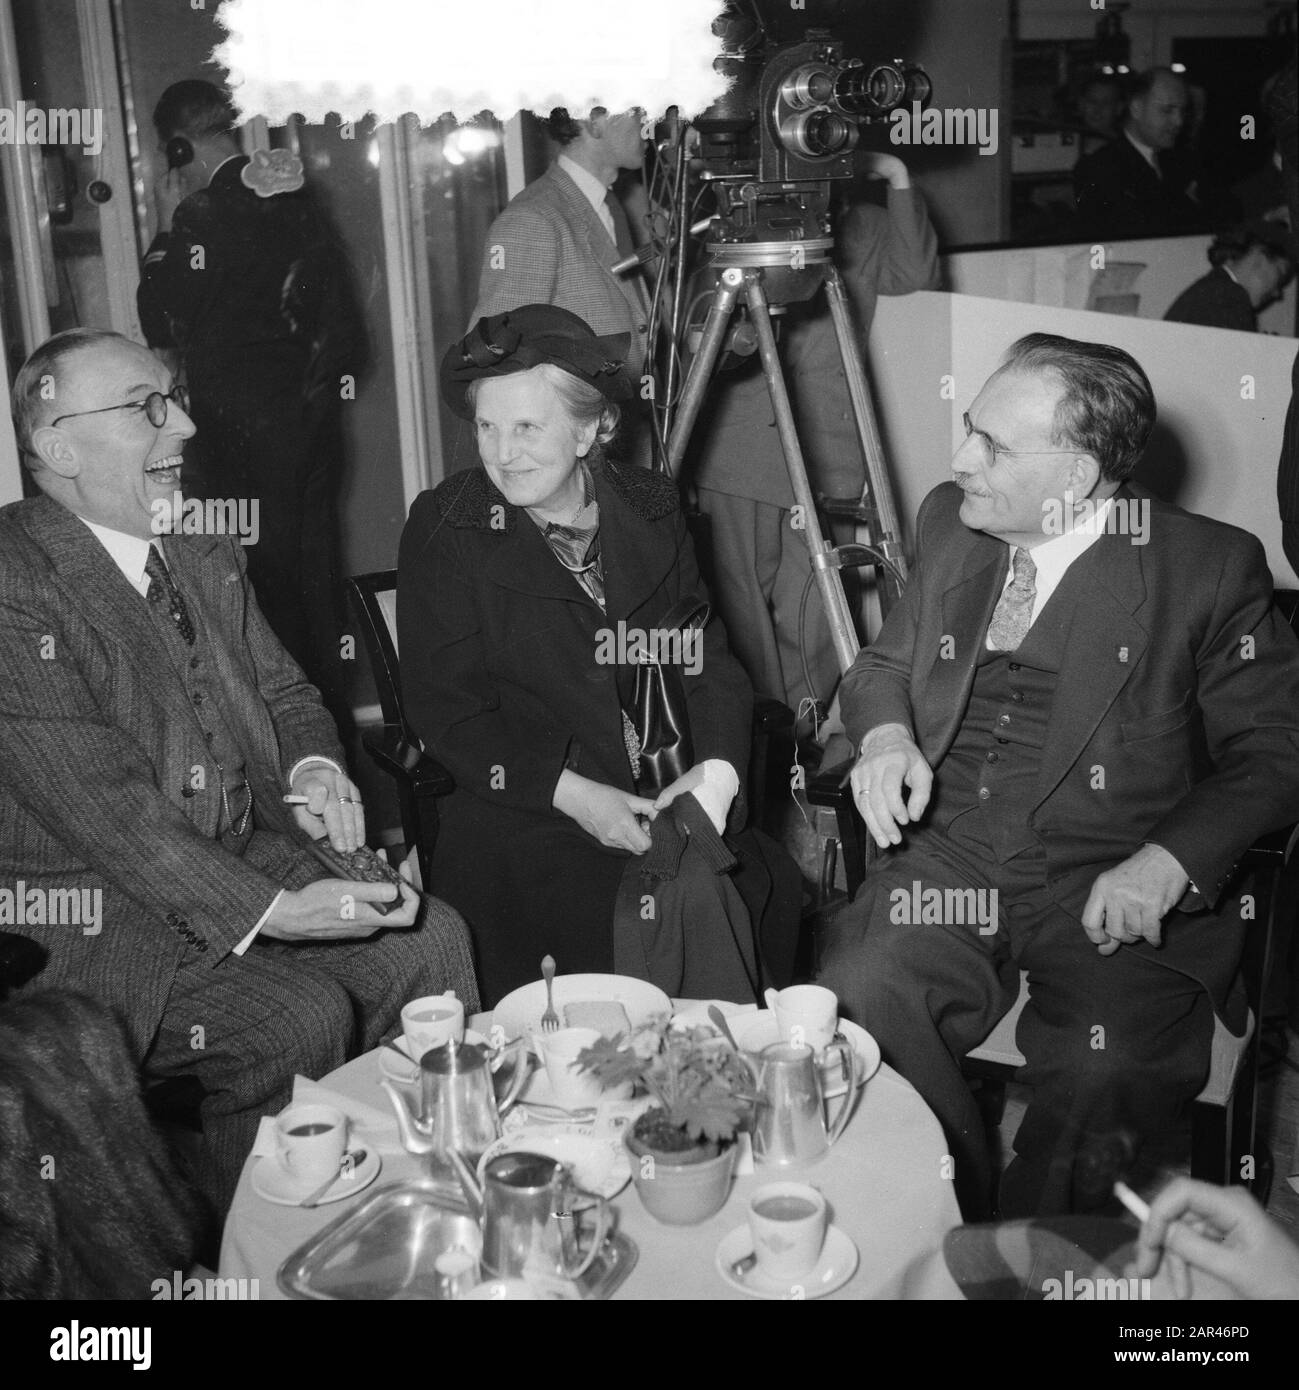 Departure Minister President Drees to America Date: 11 January 1952 Location: America Keywords: DEPARTURE Personname: Drees, Willem Stock Photo